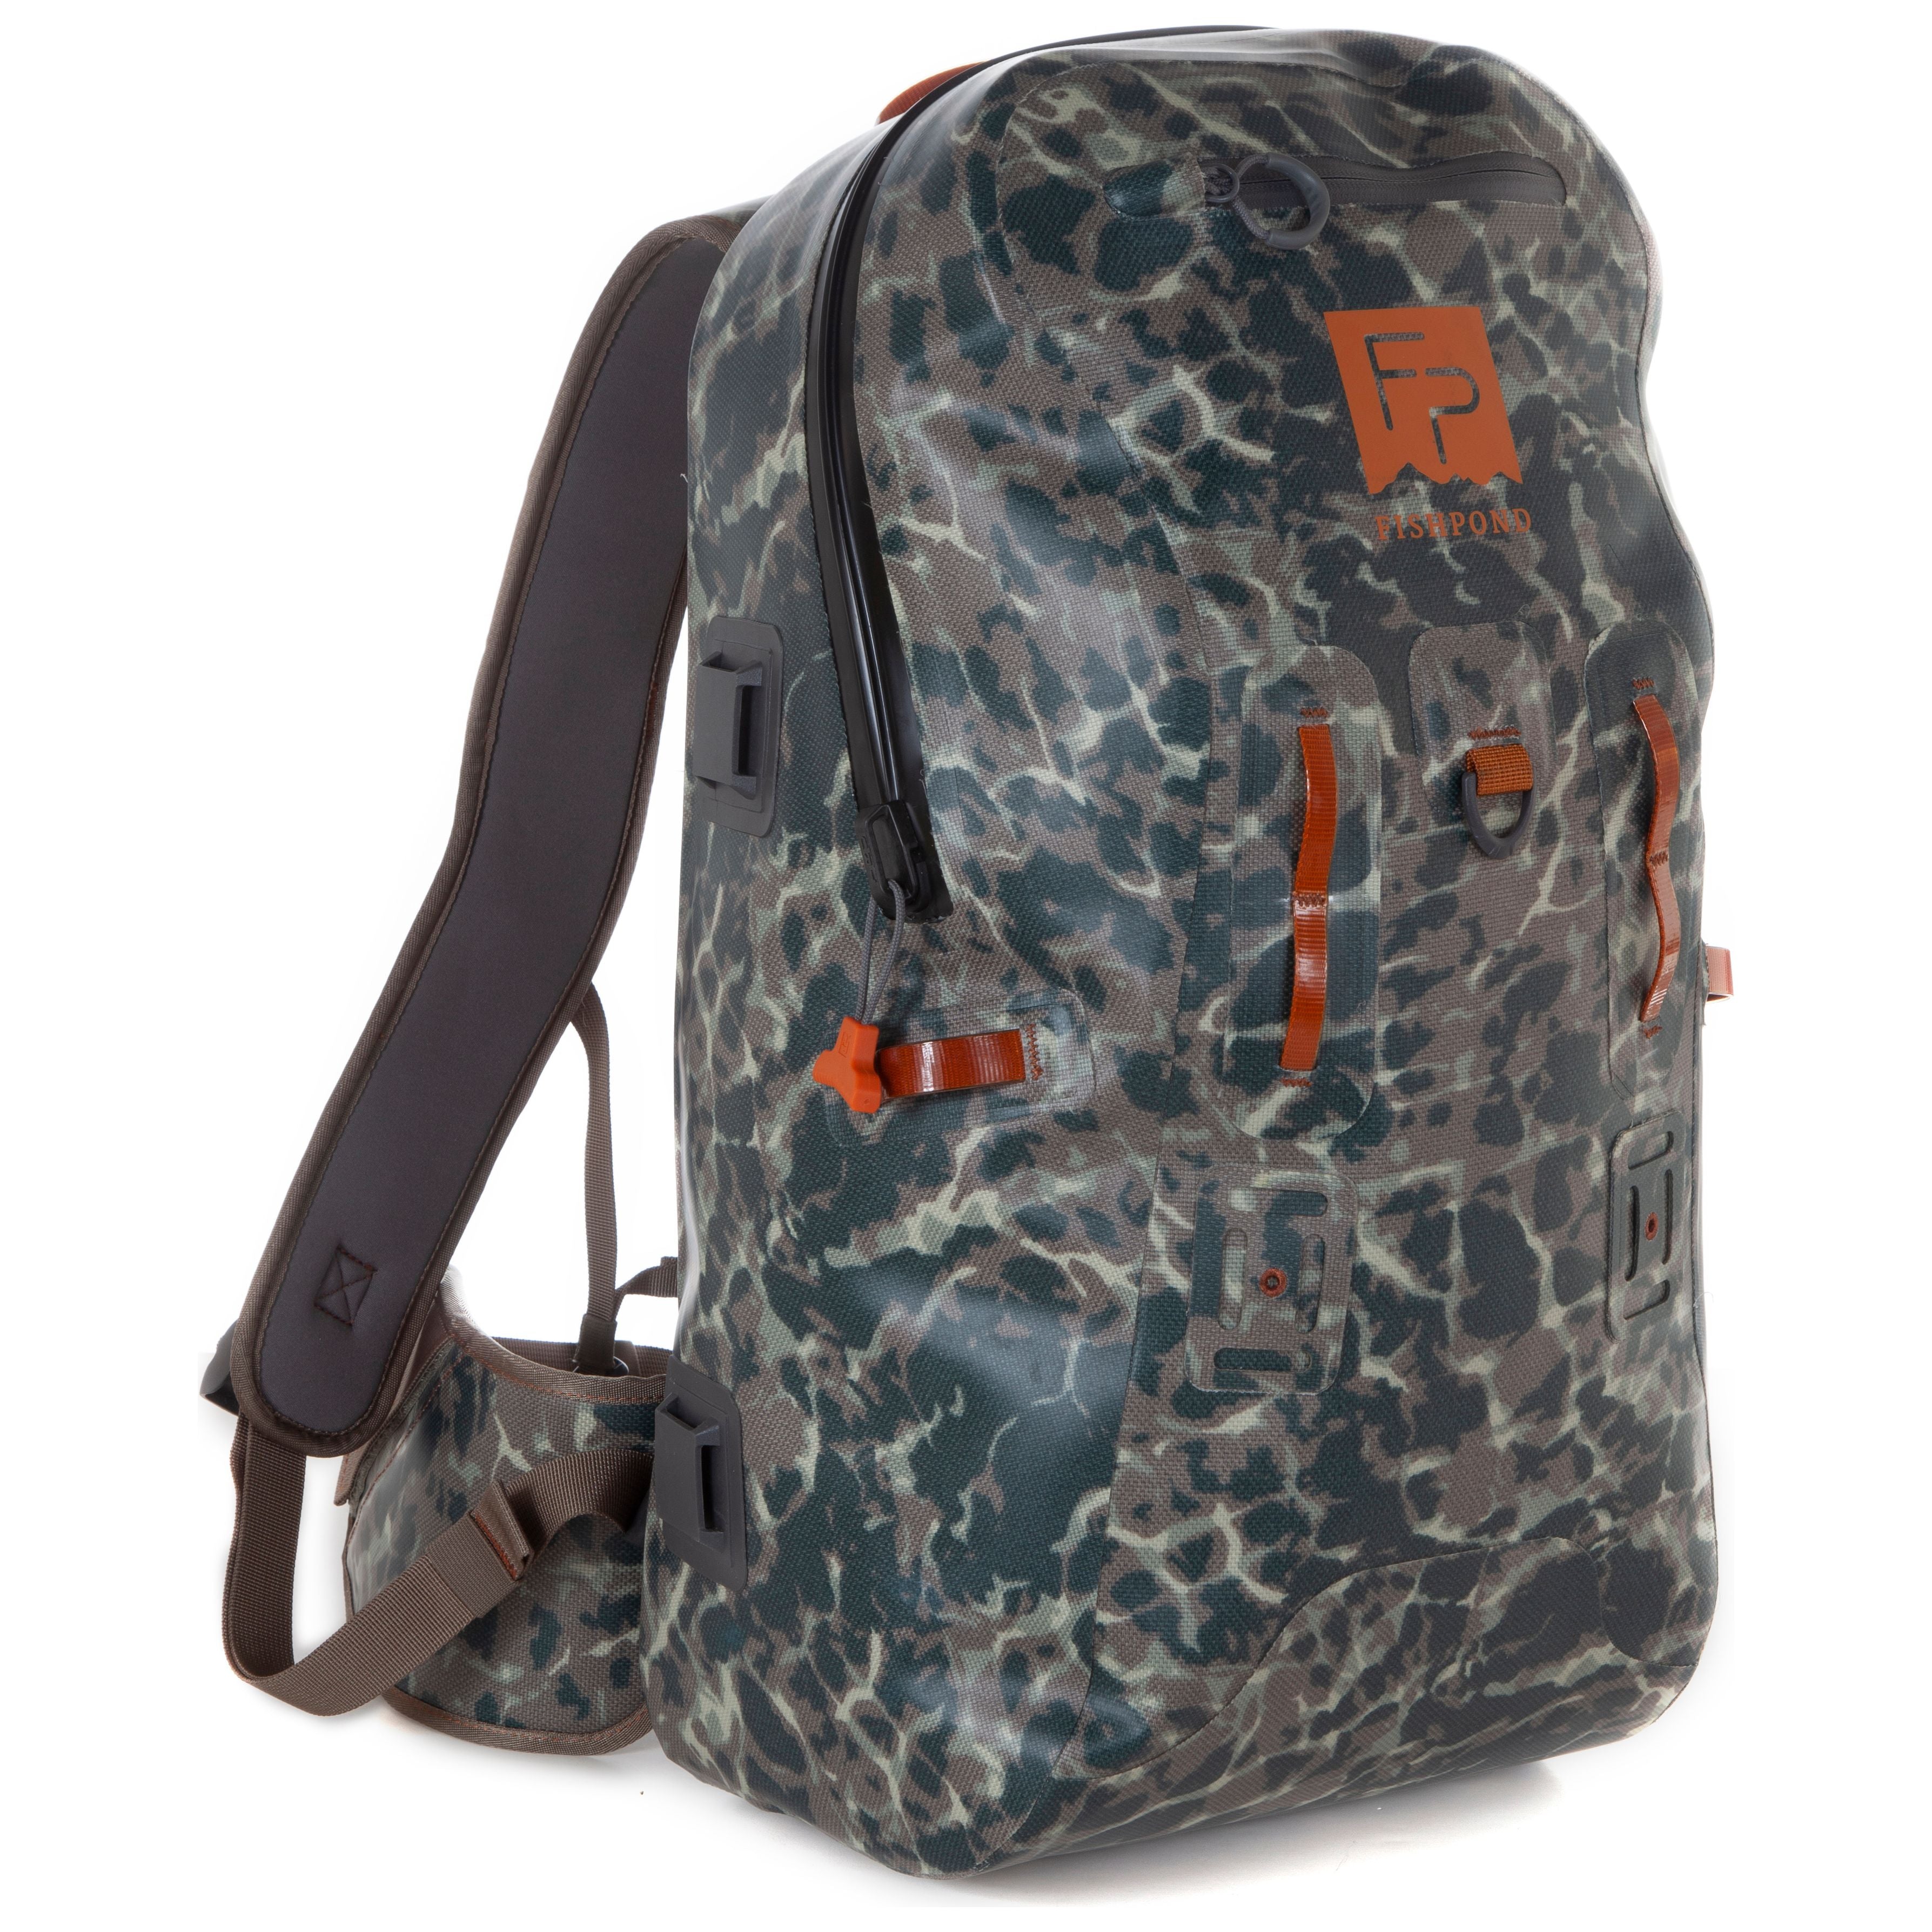 Fishpond Thunderhead Submersible Backpack Eco Riverbed Camo Image 01